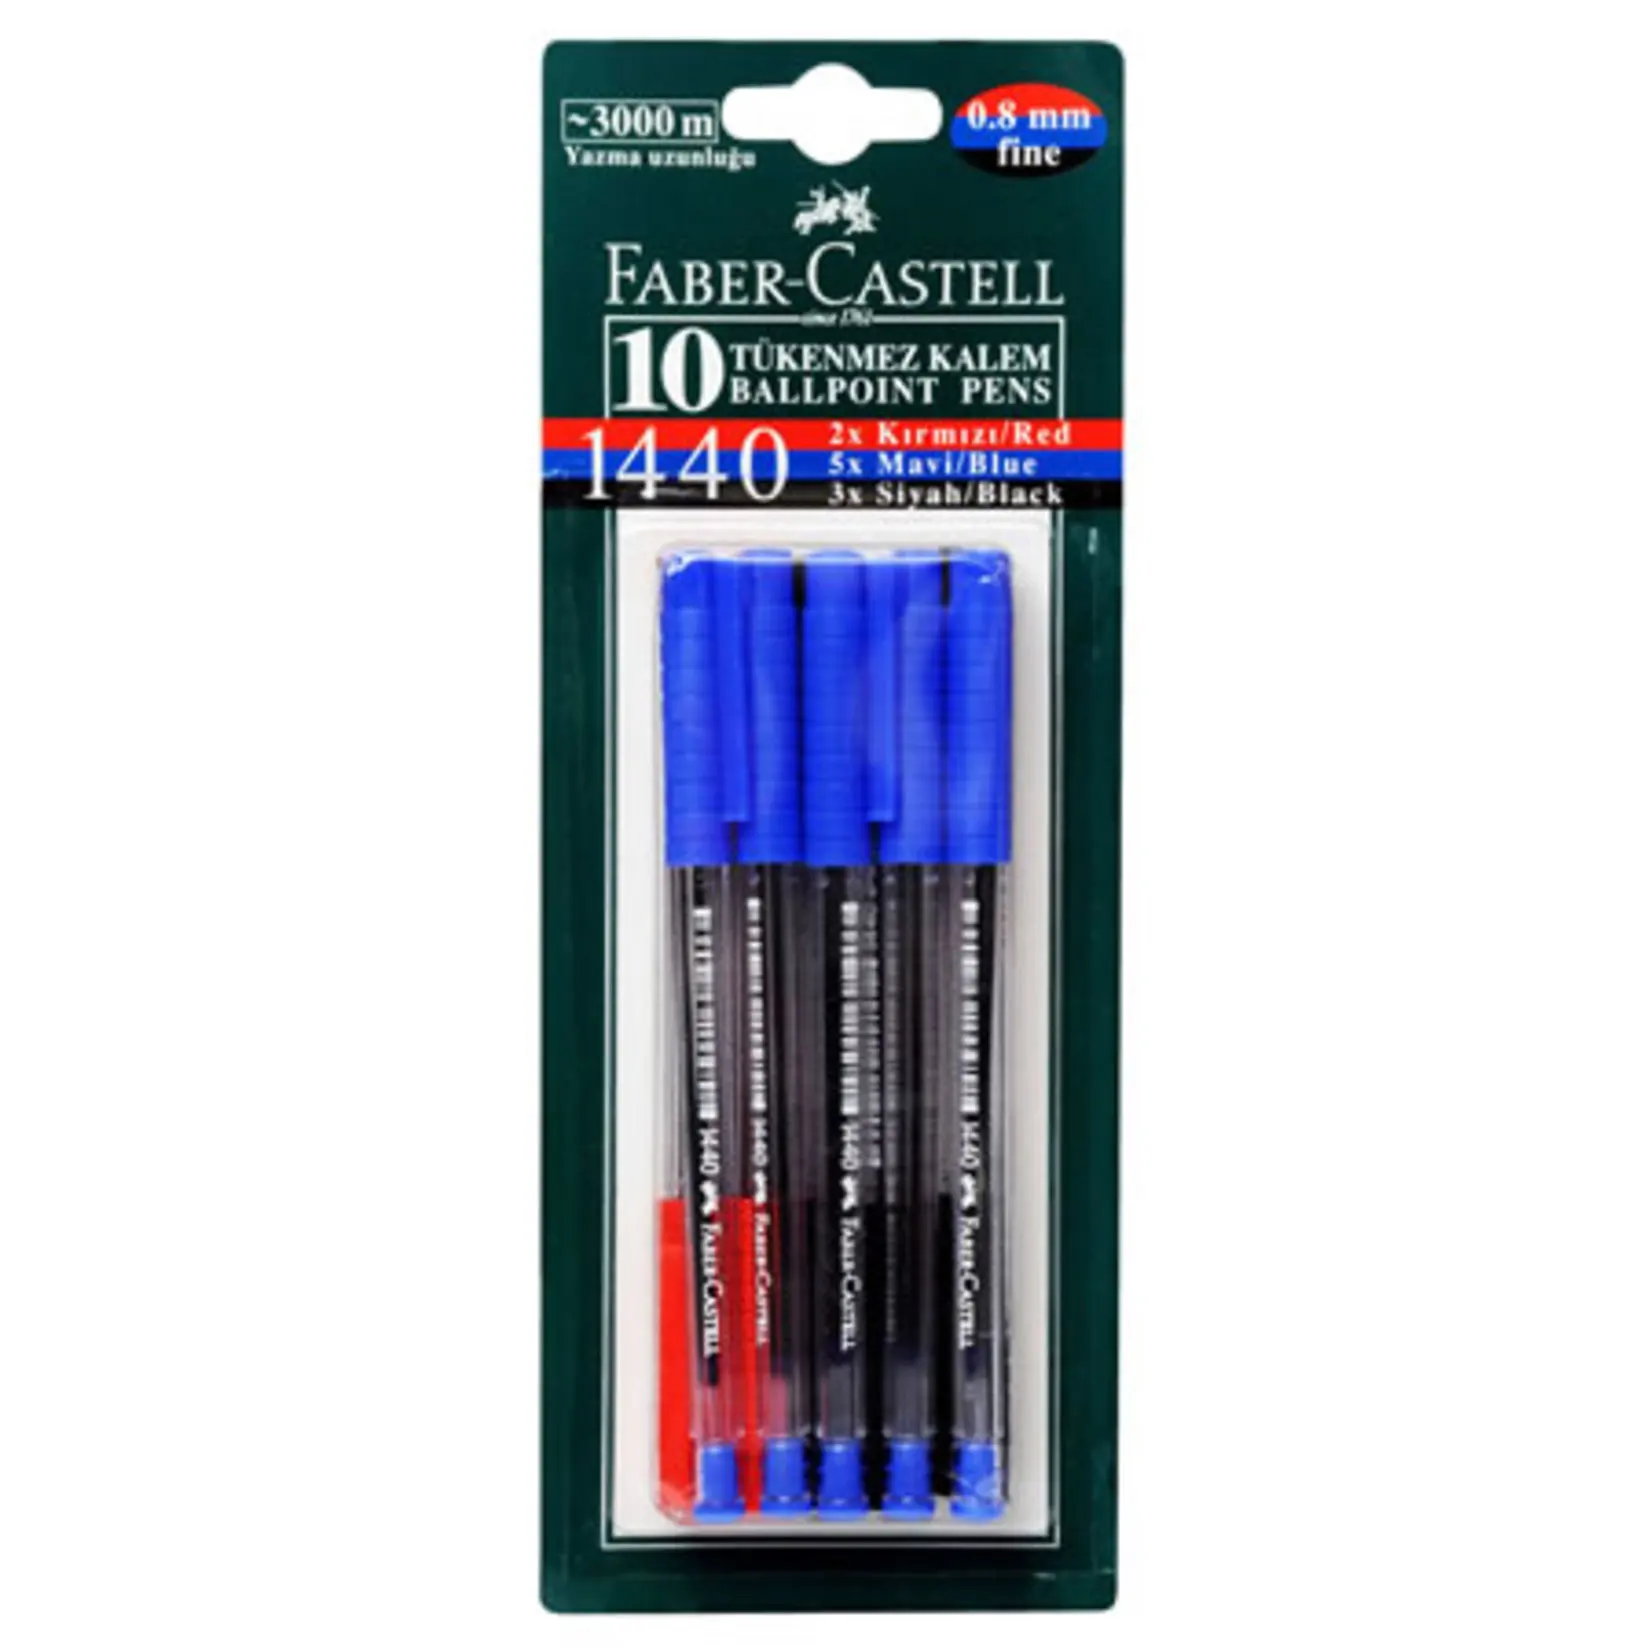 Faber Castell 10 Ball Mixed Color School Business Day Use Area Large Color 3 Red 5 Blue Pen Not Yazımı and Emergency Post